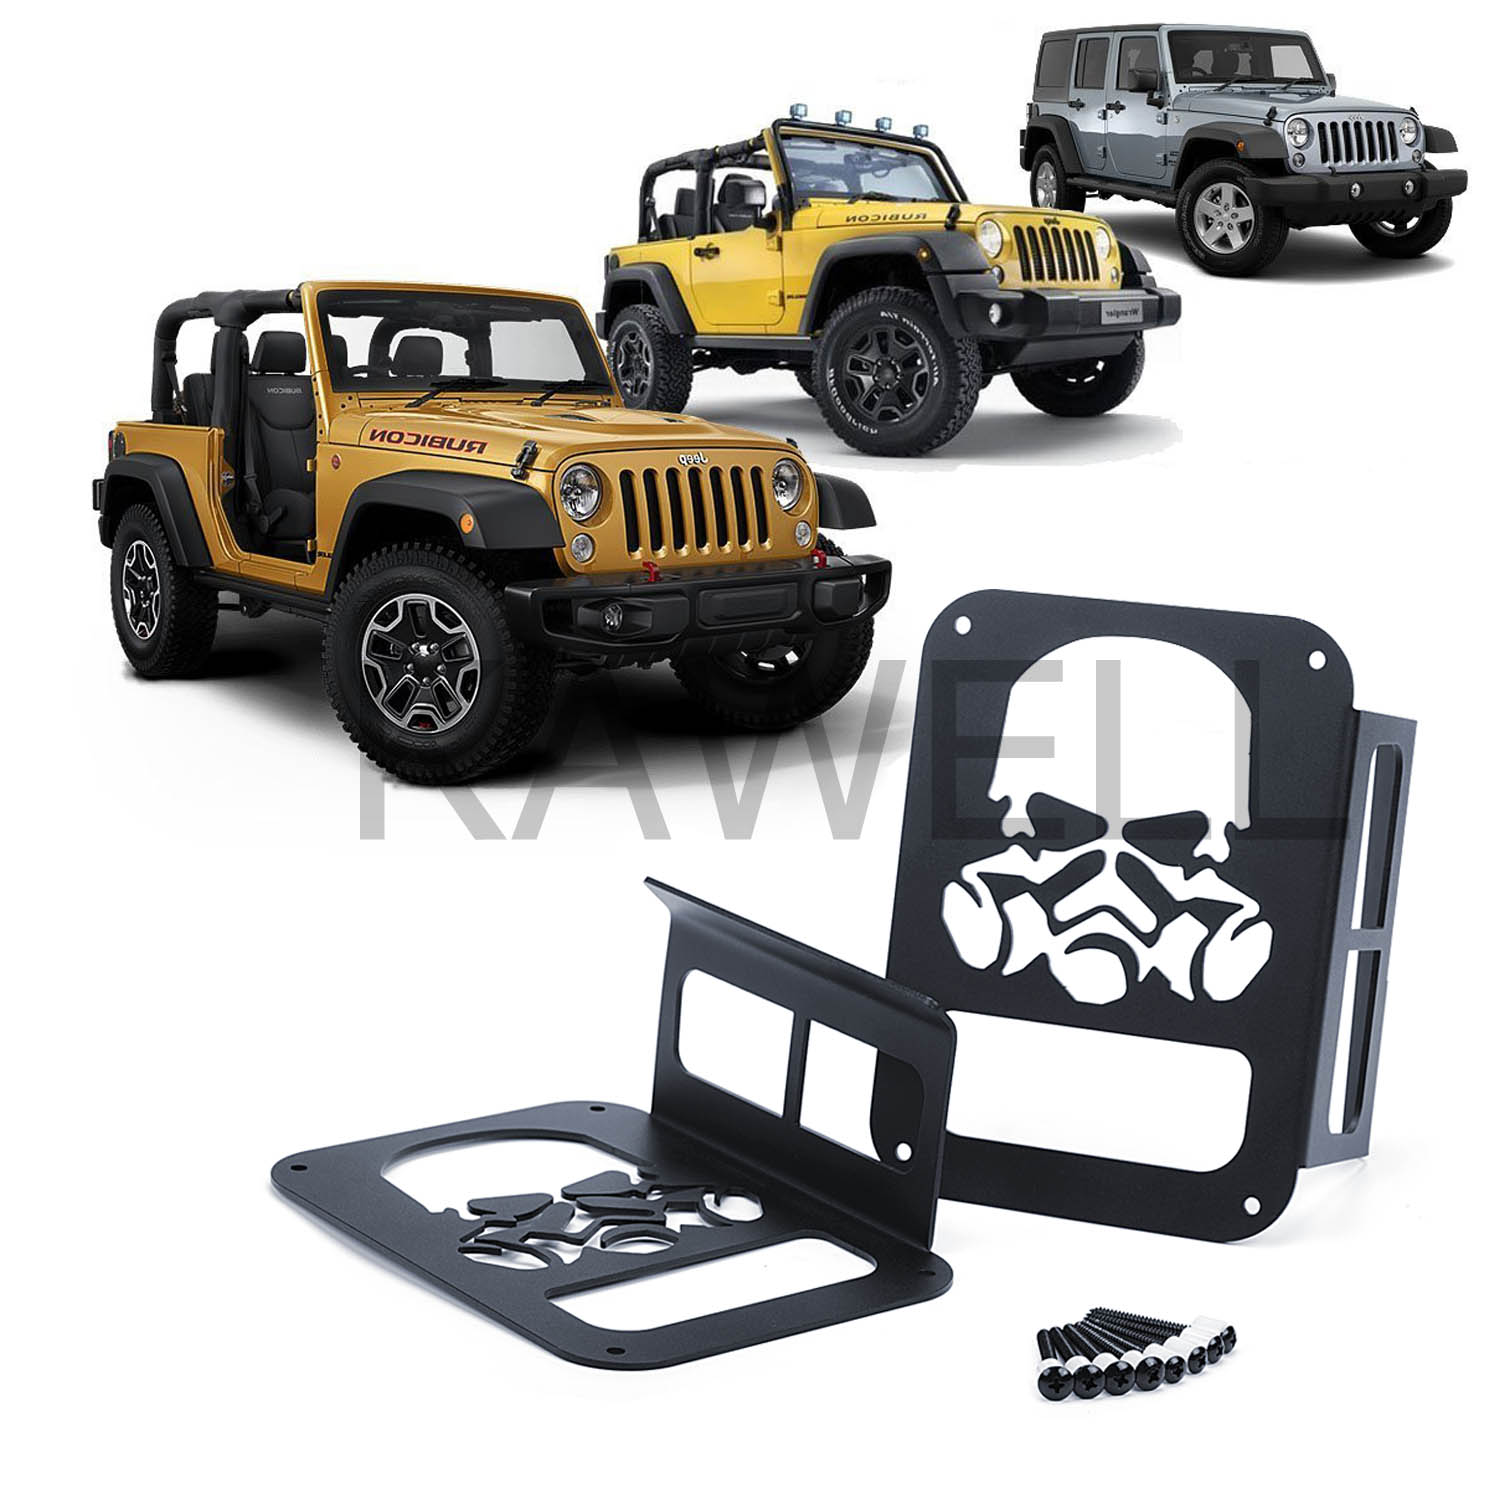 KAWELL Skull Gas Mask Black Light Guard Protector For 2007-2016 Jeep Wrangler 2/4 door Sport X Sahara Unlimited Rubicon Rear Taillights ( Tail Light ) Cover - Pair